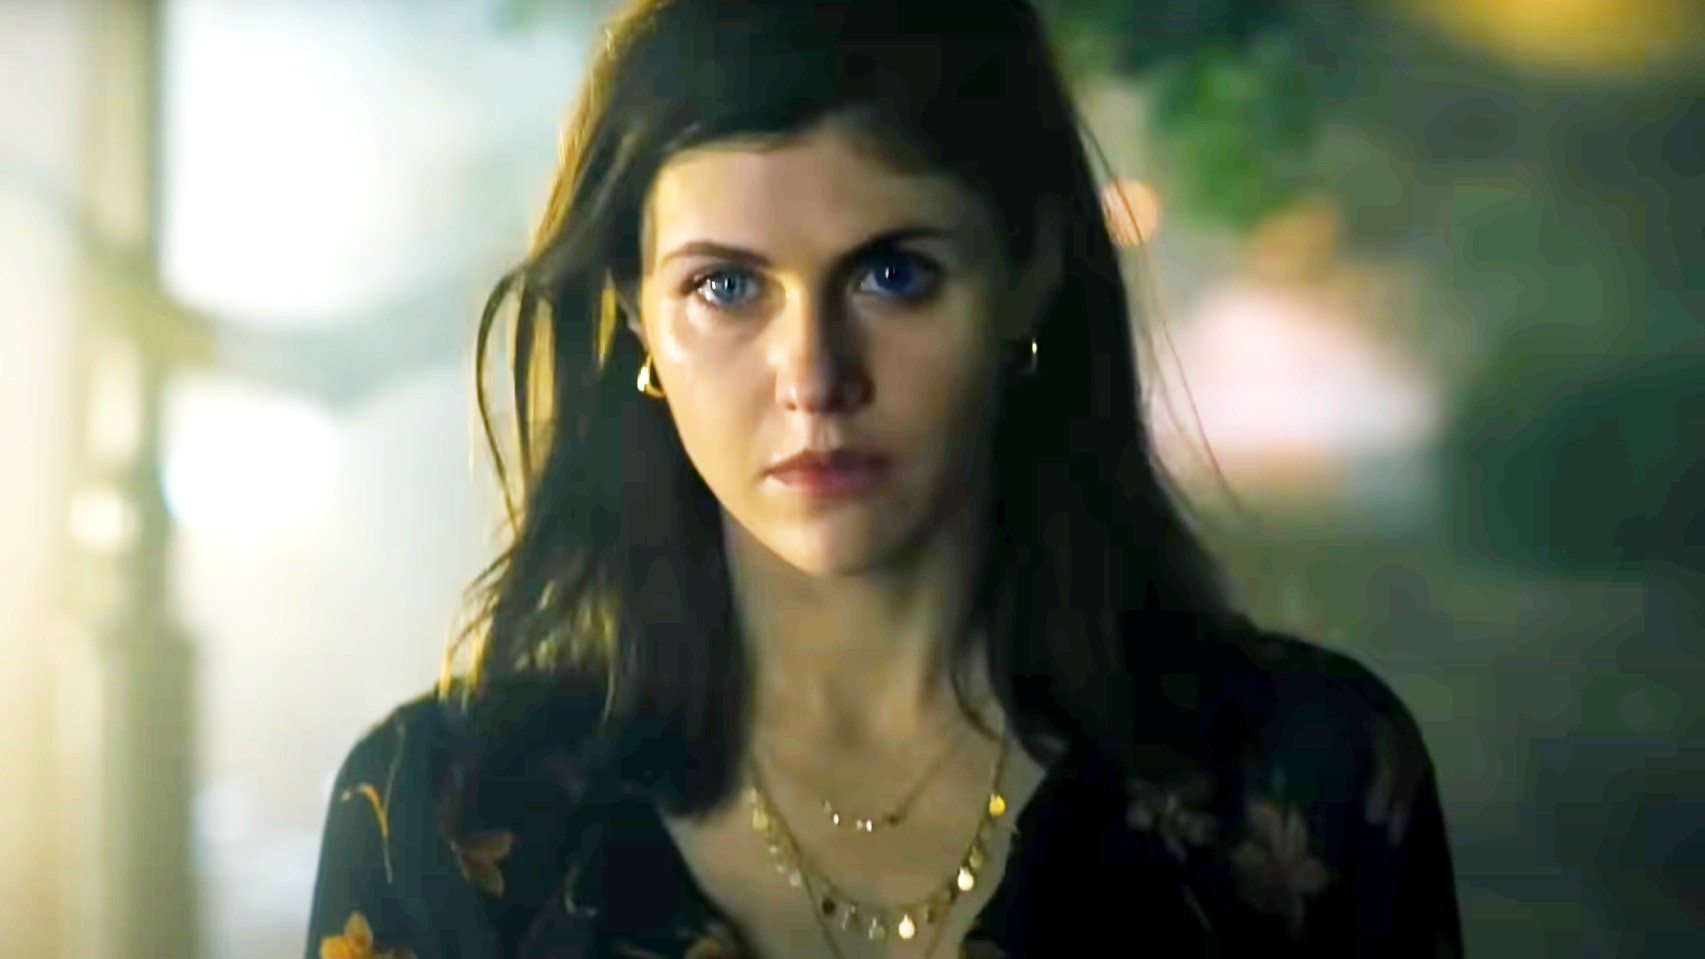 See Alexandra Daddario In A Form-Fitting Black Dress And Hearts